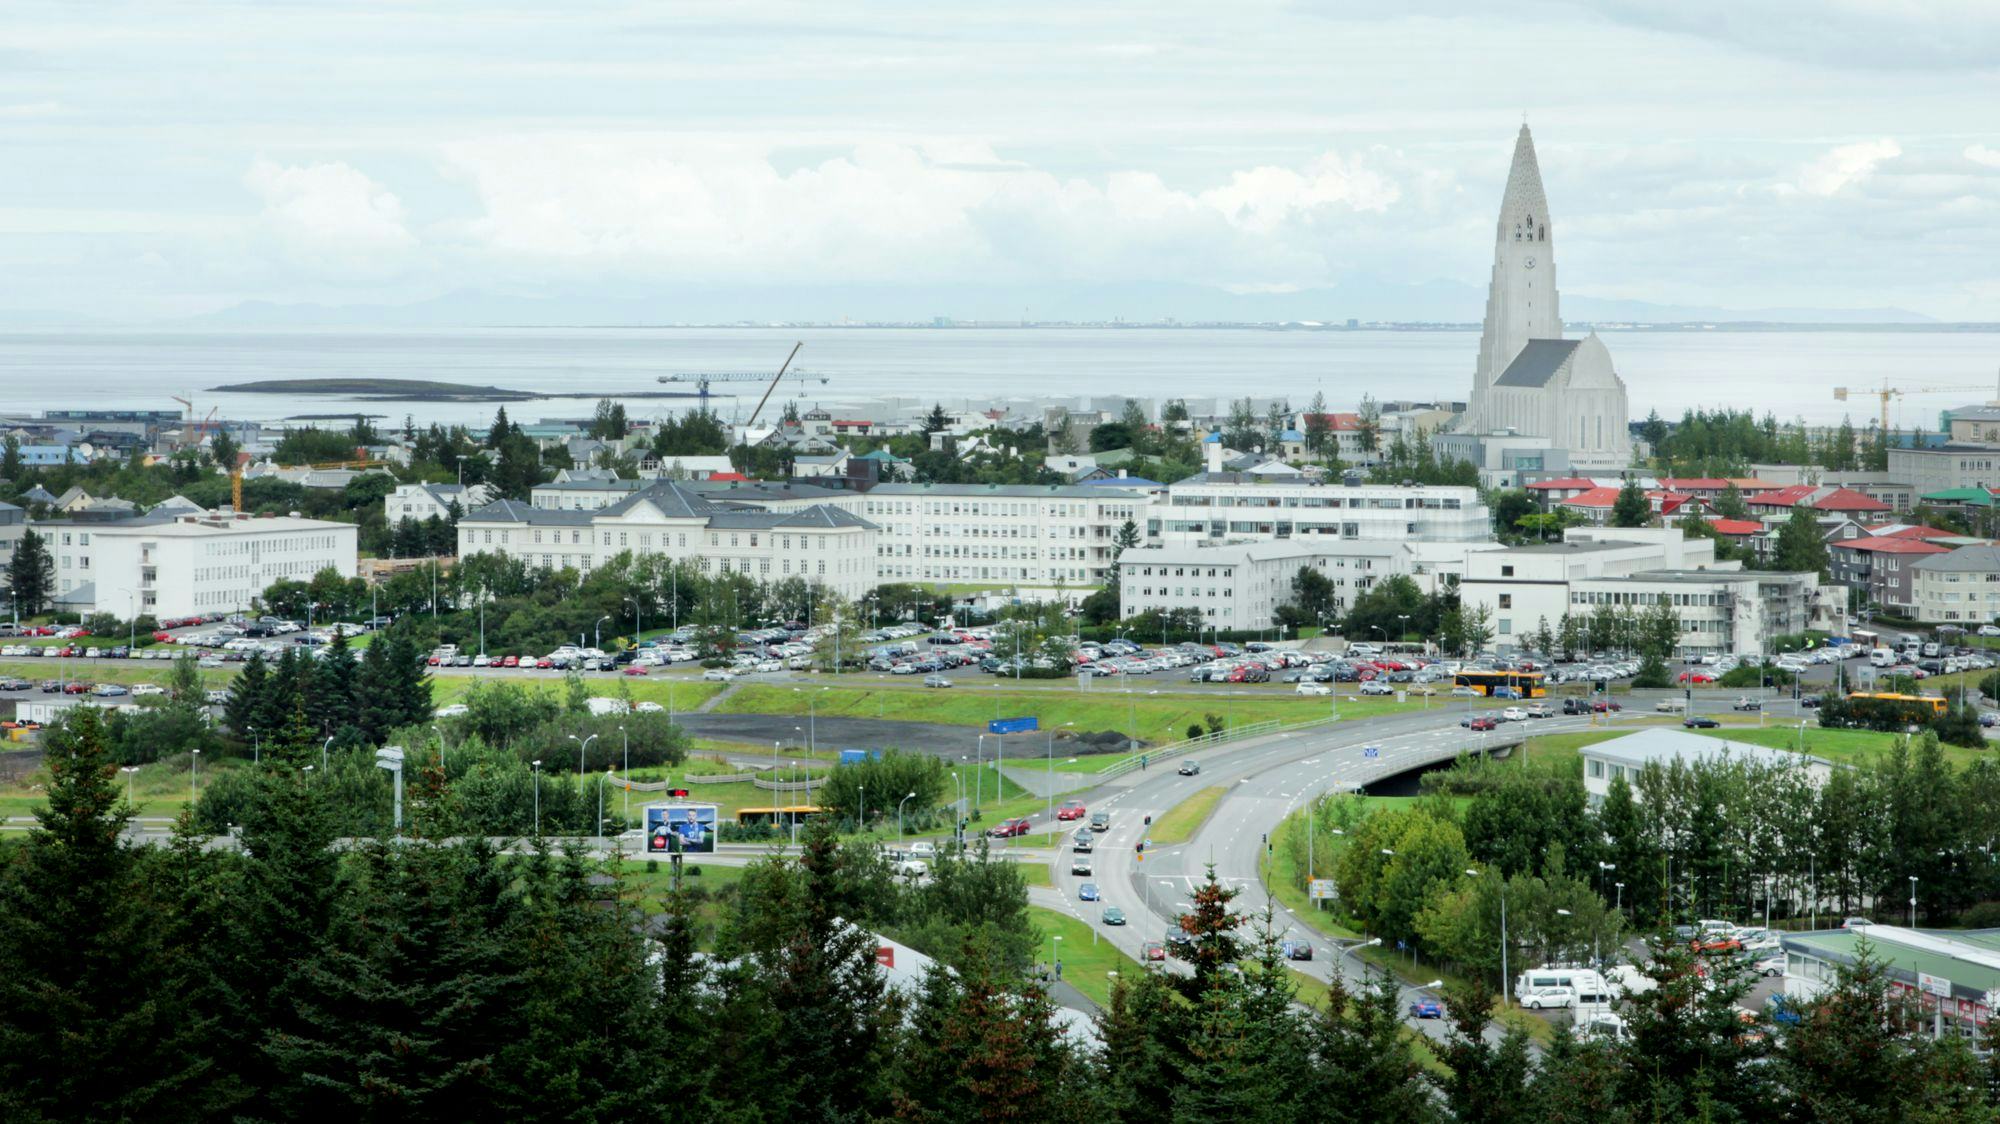 Looking over the city of Reykjavík to the southwest, Hallgrímskirkja church stands out, trees in the foreground, sea in the background